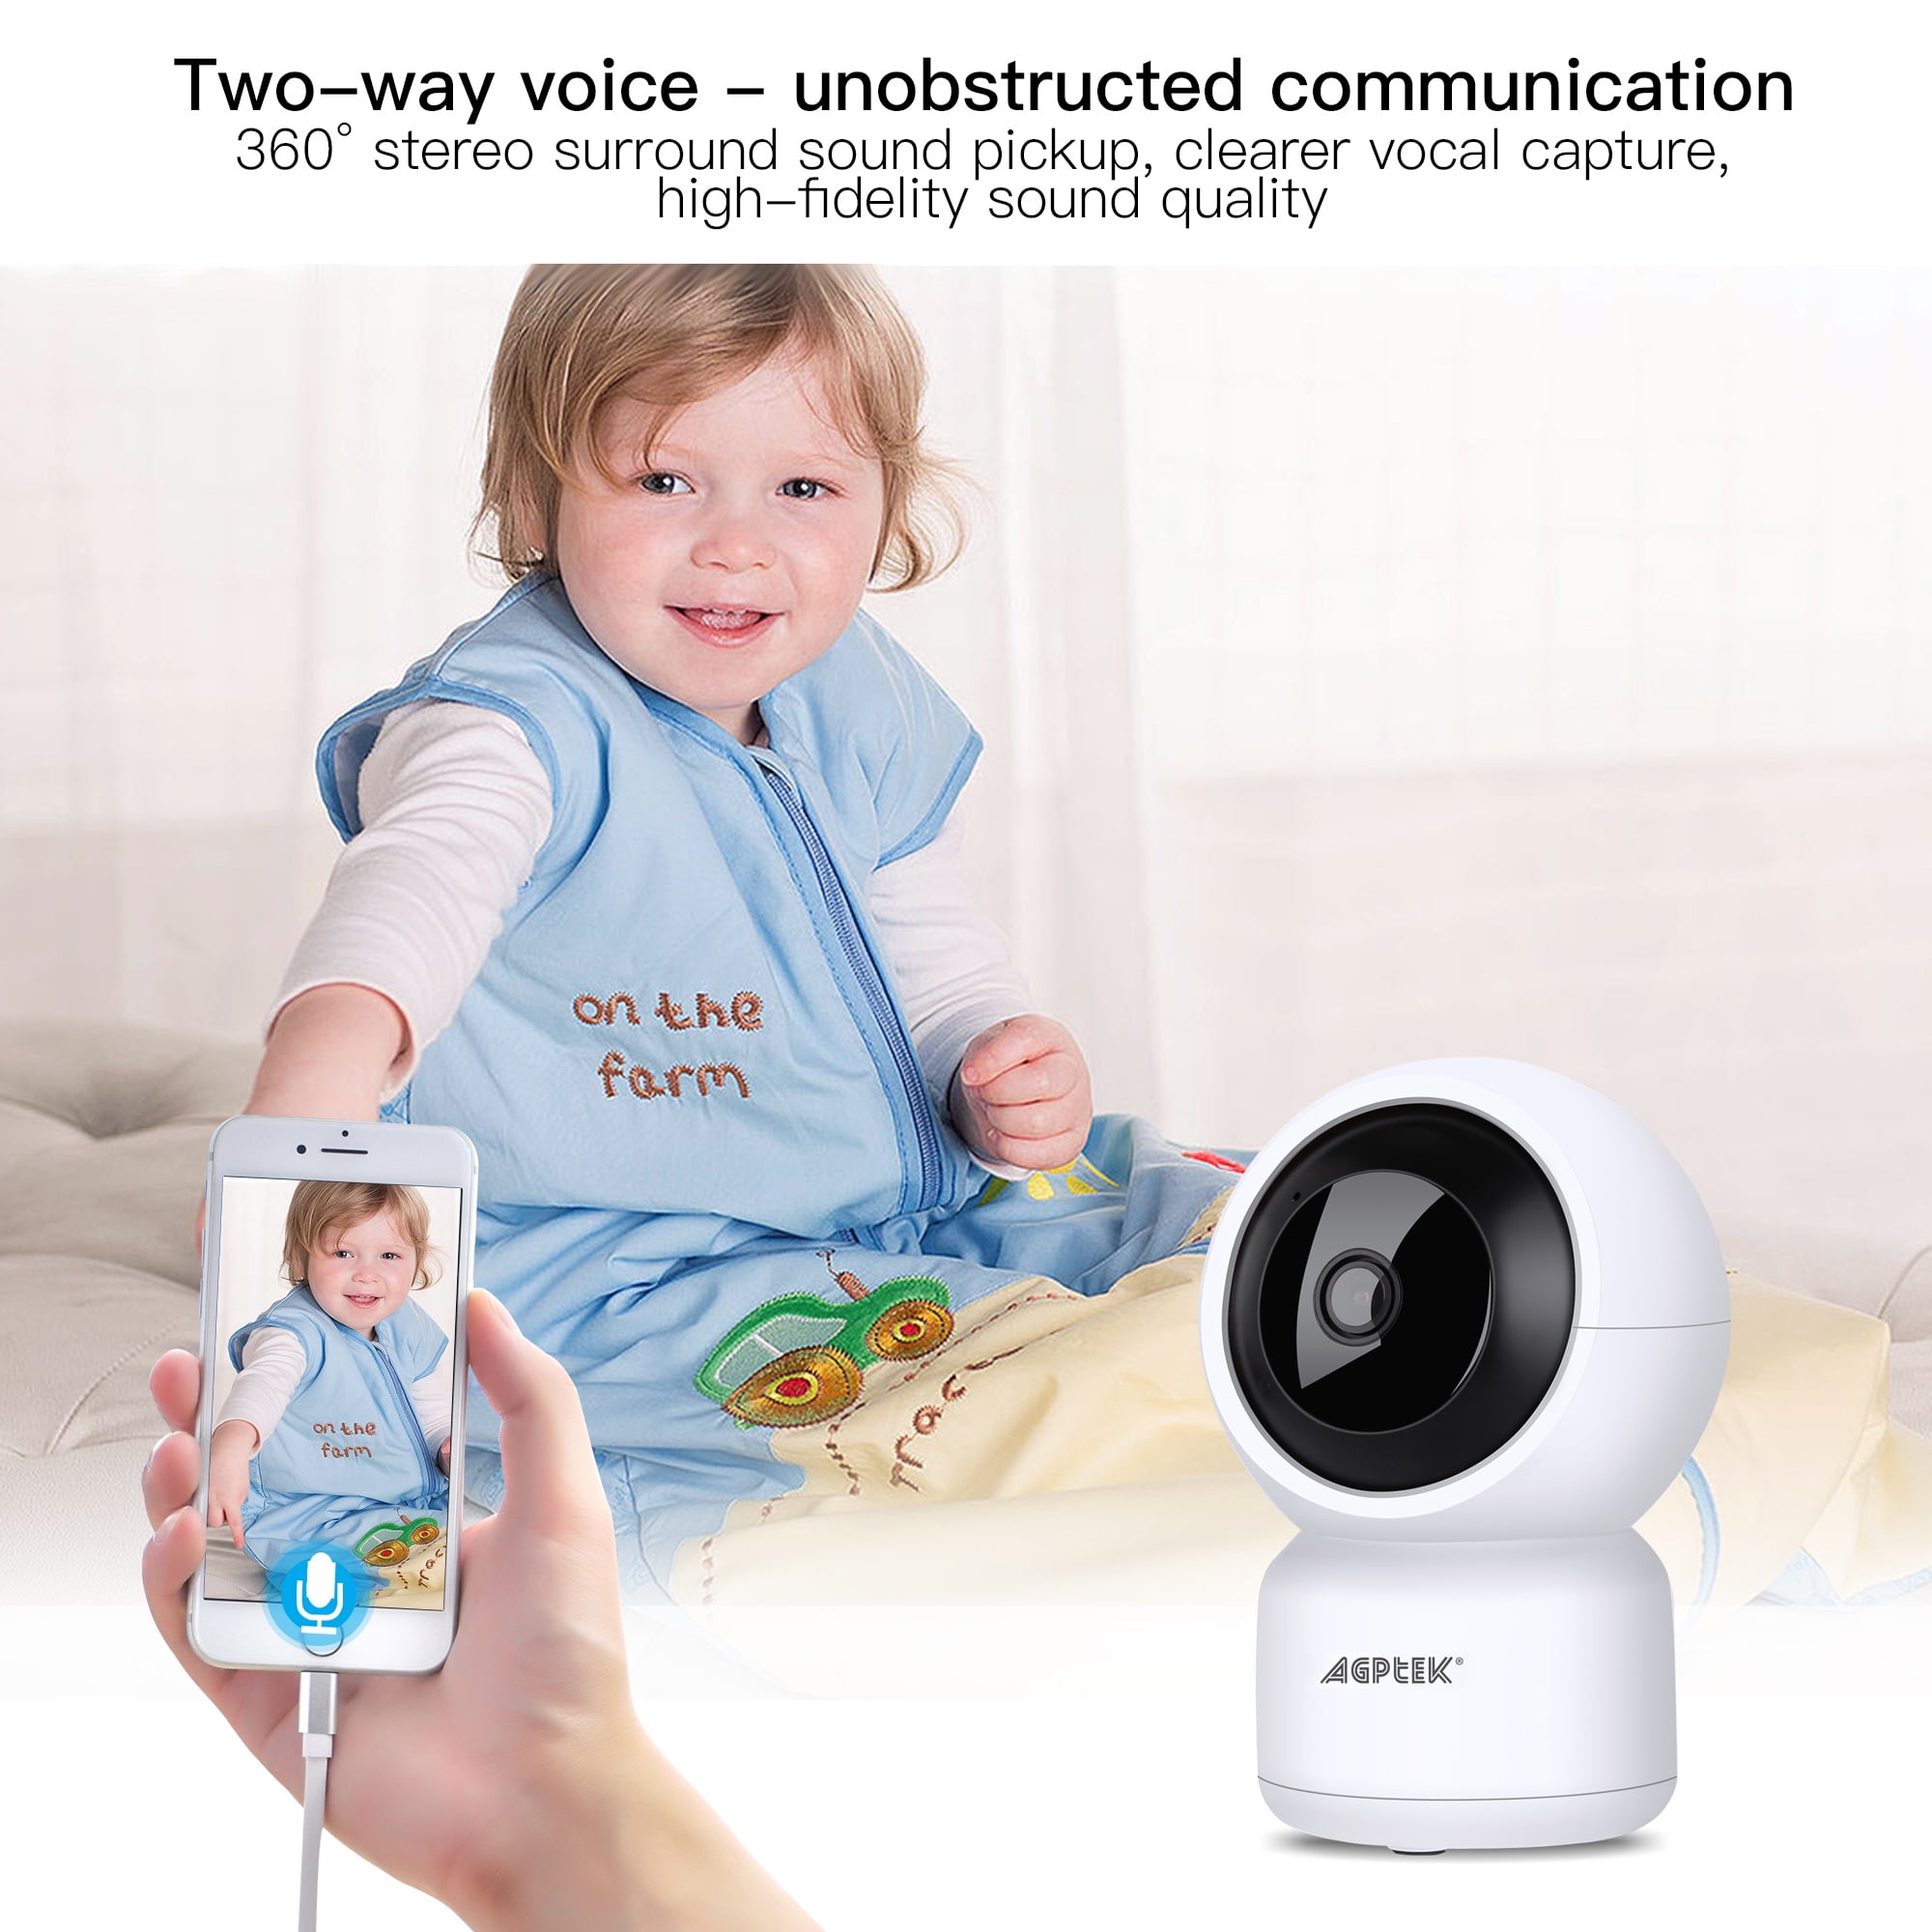 960P Camera,Wireless IP Home Security Camera with Night Vision,Motion Detection,Two-Way Audio,IR-Cut,Encrypted Security Cloud Storage Service for Baby Elder Pet US Plug